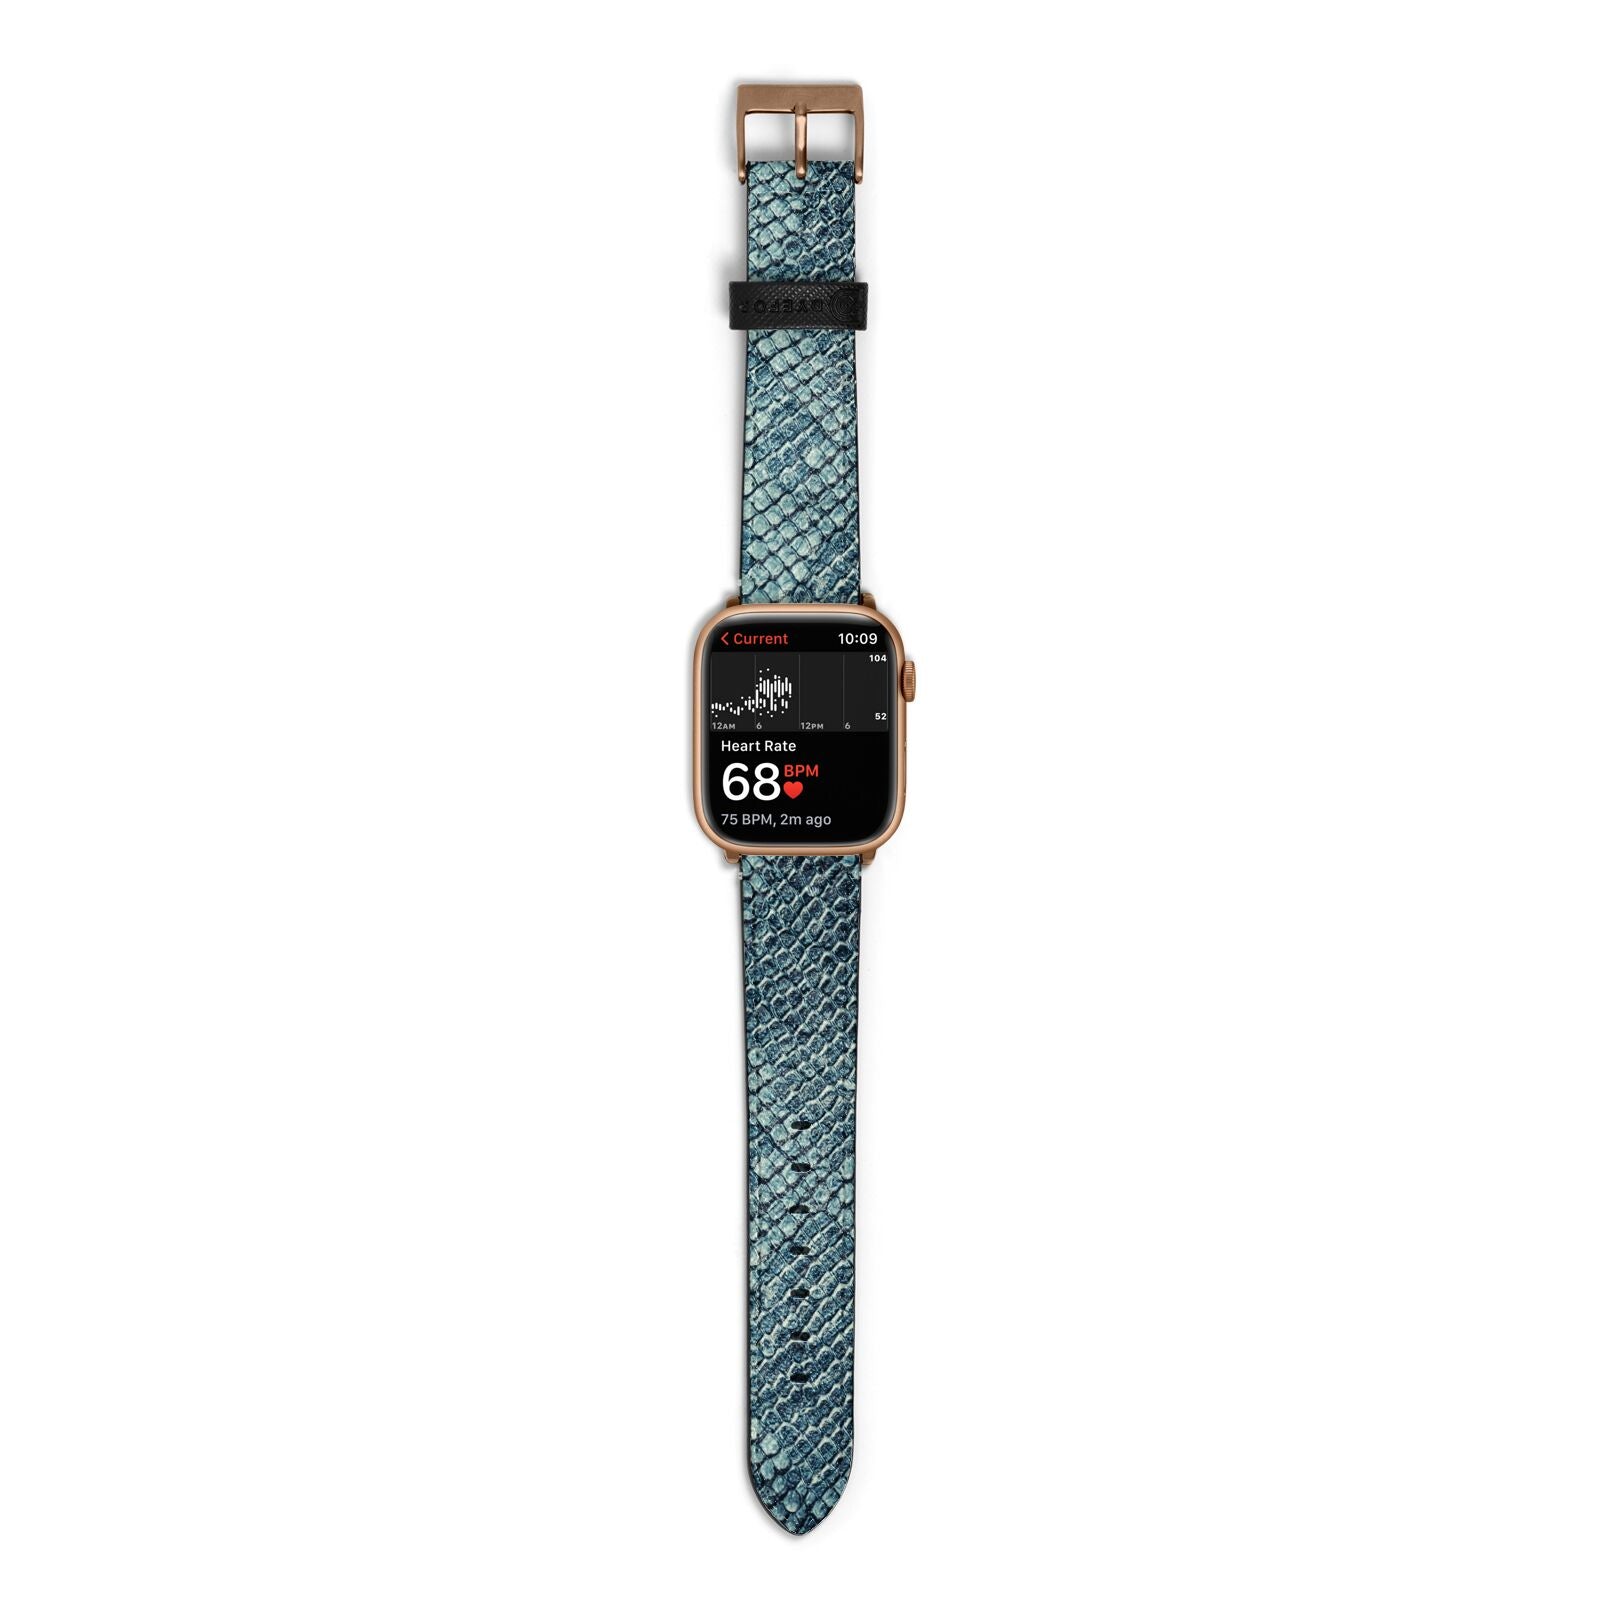 Teal Snakeskin Apple Watch Strap Size 38mm with Gold Hardware